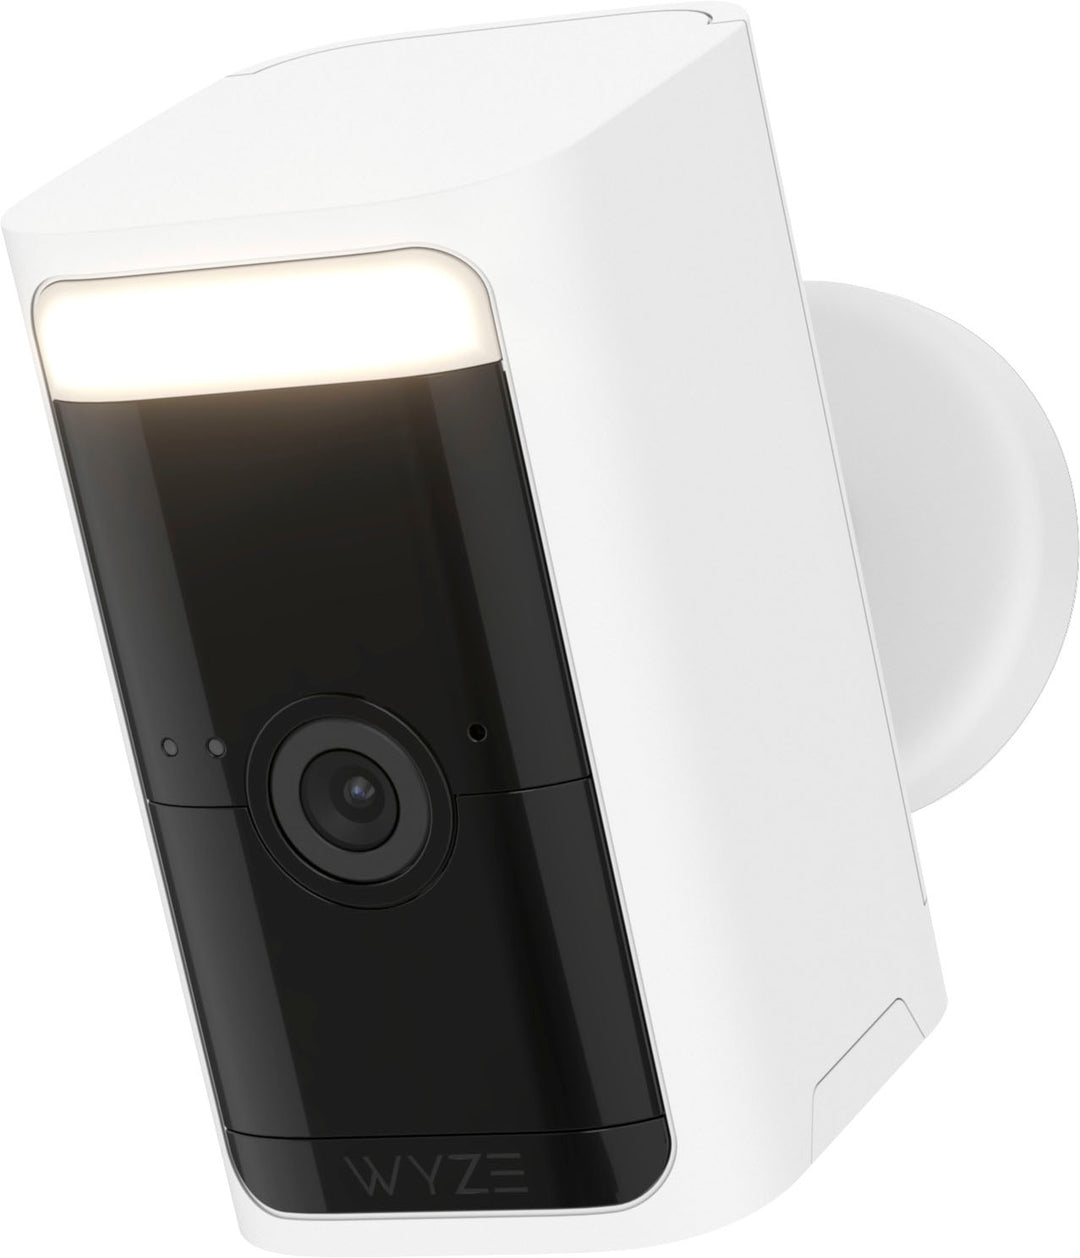 Wyze - Battery Cam Pro 2k HDR Wireless Outdoor/Indoor WiFi Security Camera with Motion Detection and Two-Way Audio - White_0